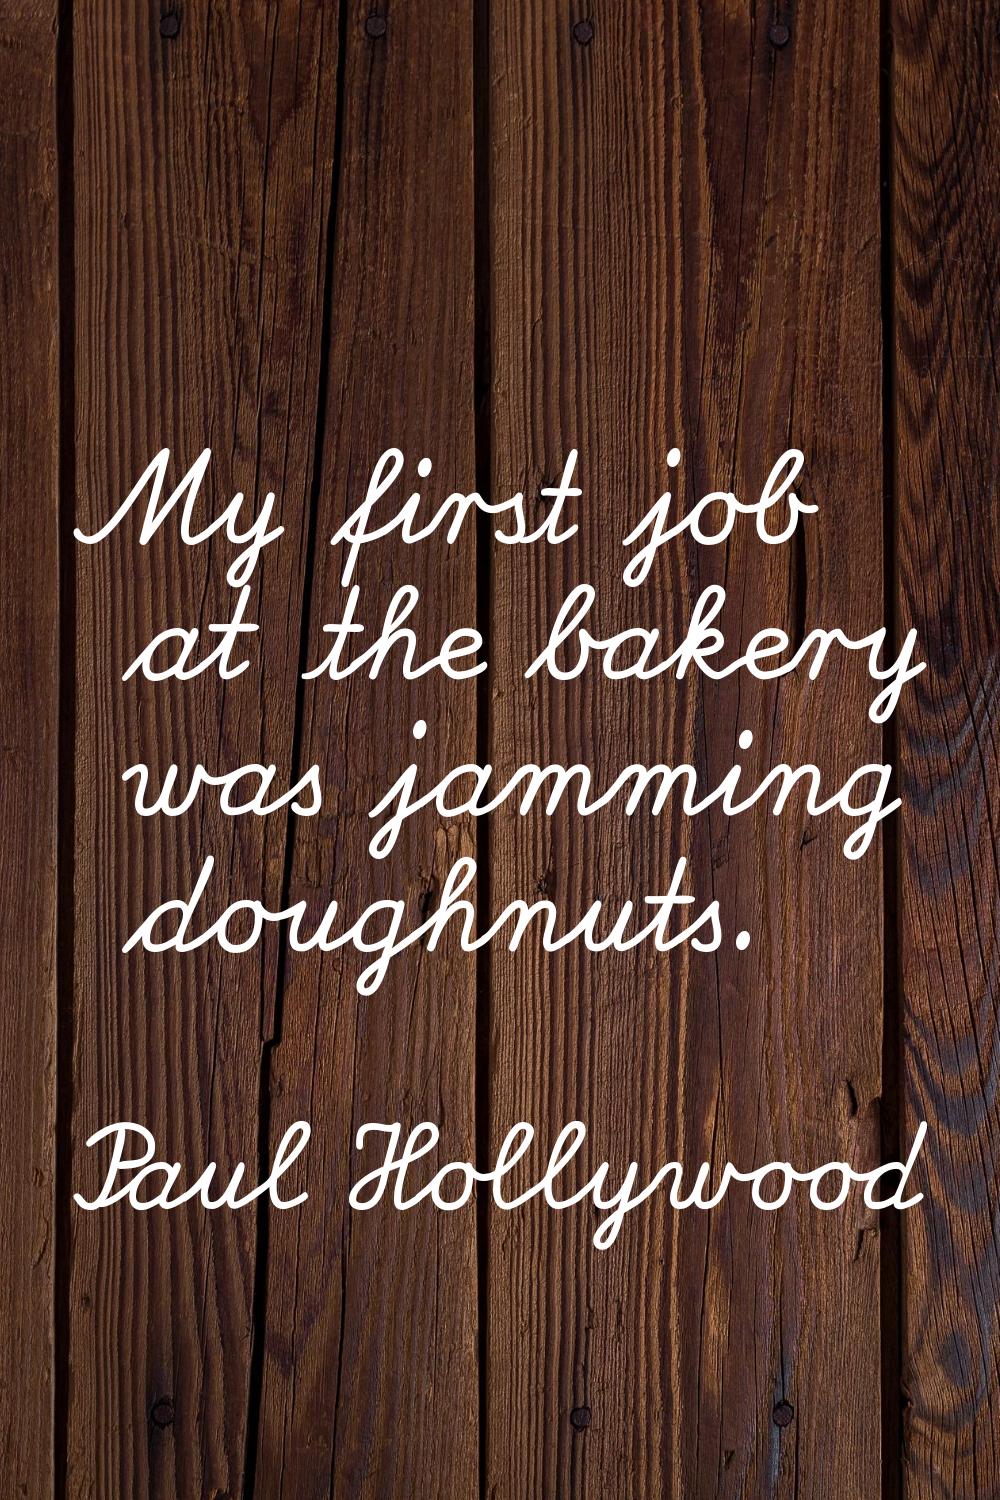 My first job at the bakery was jamming doughnuts.